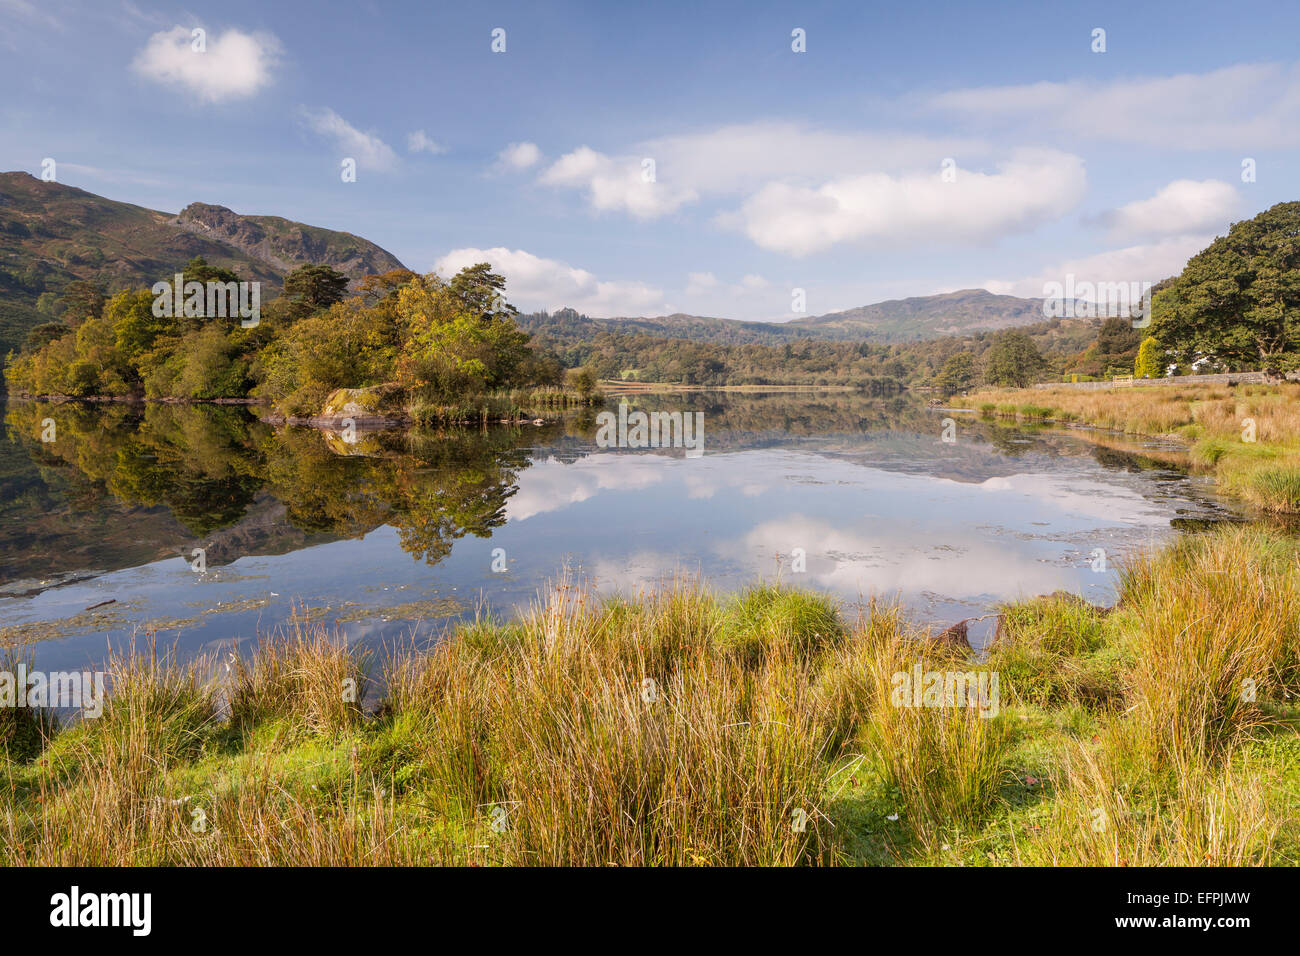 The still water of Rydal Water in the Lake District National Park, Cumbria, England, United Kingdom, Europe Stock Photo